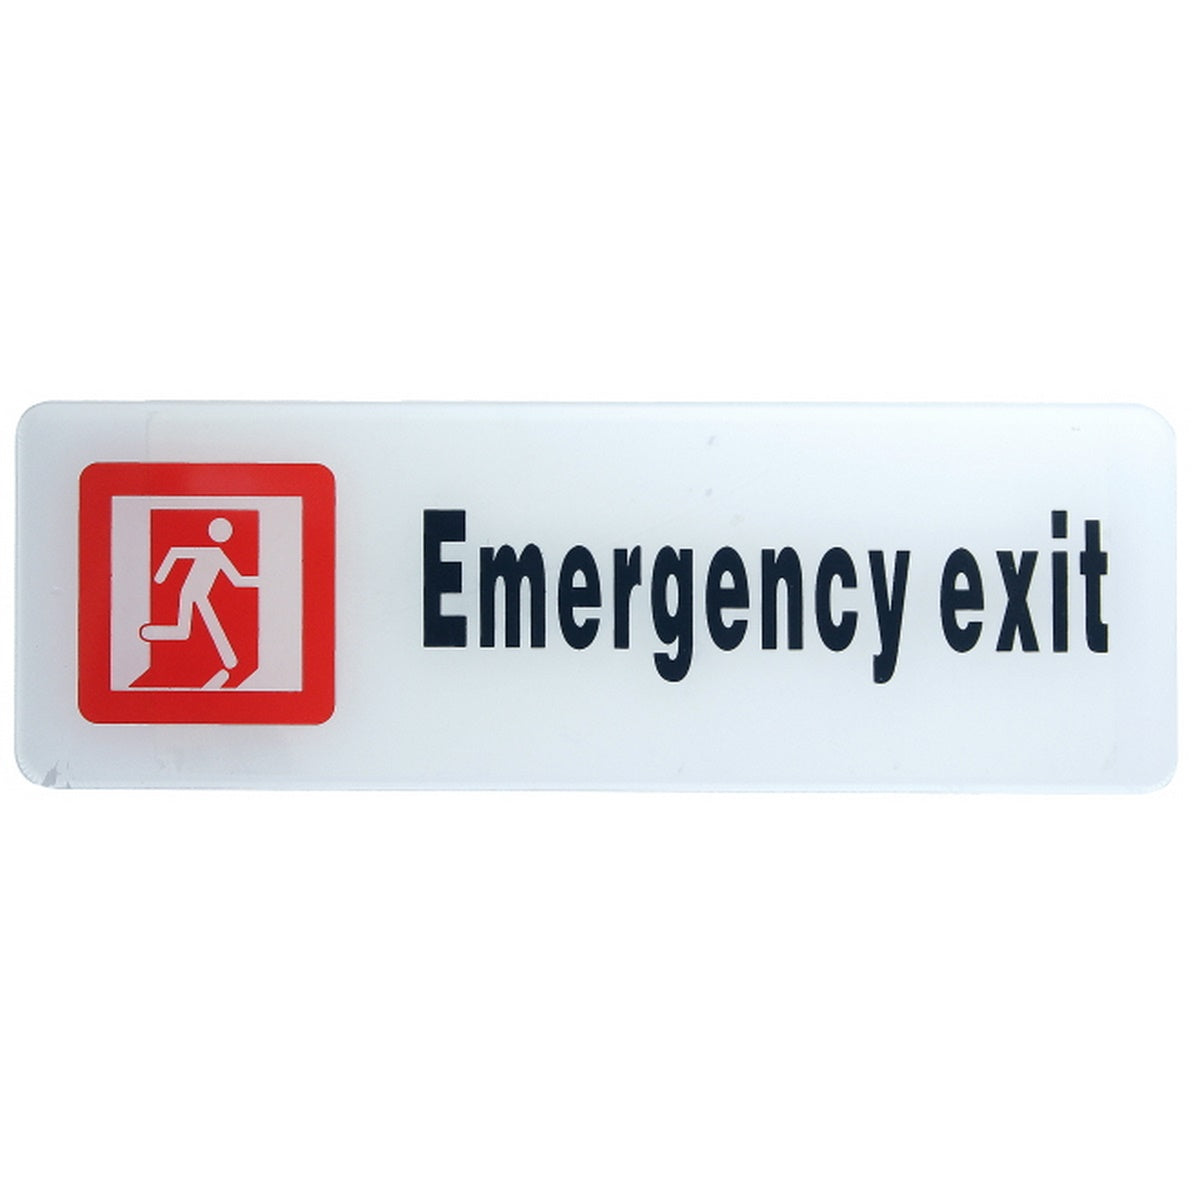 Emergency Exit Self Adhesive Sticker - For Shops, Hospitals, Schools, Corporates, Offices JASWEE